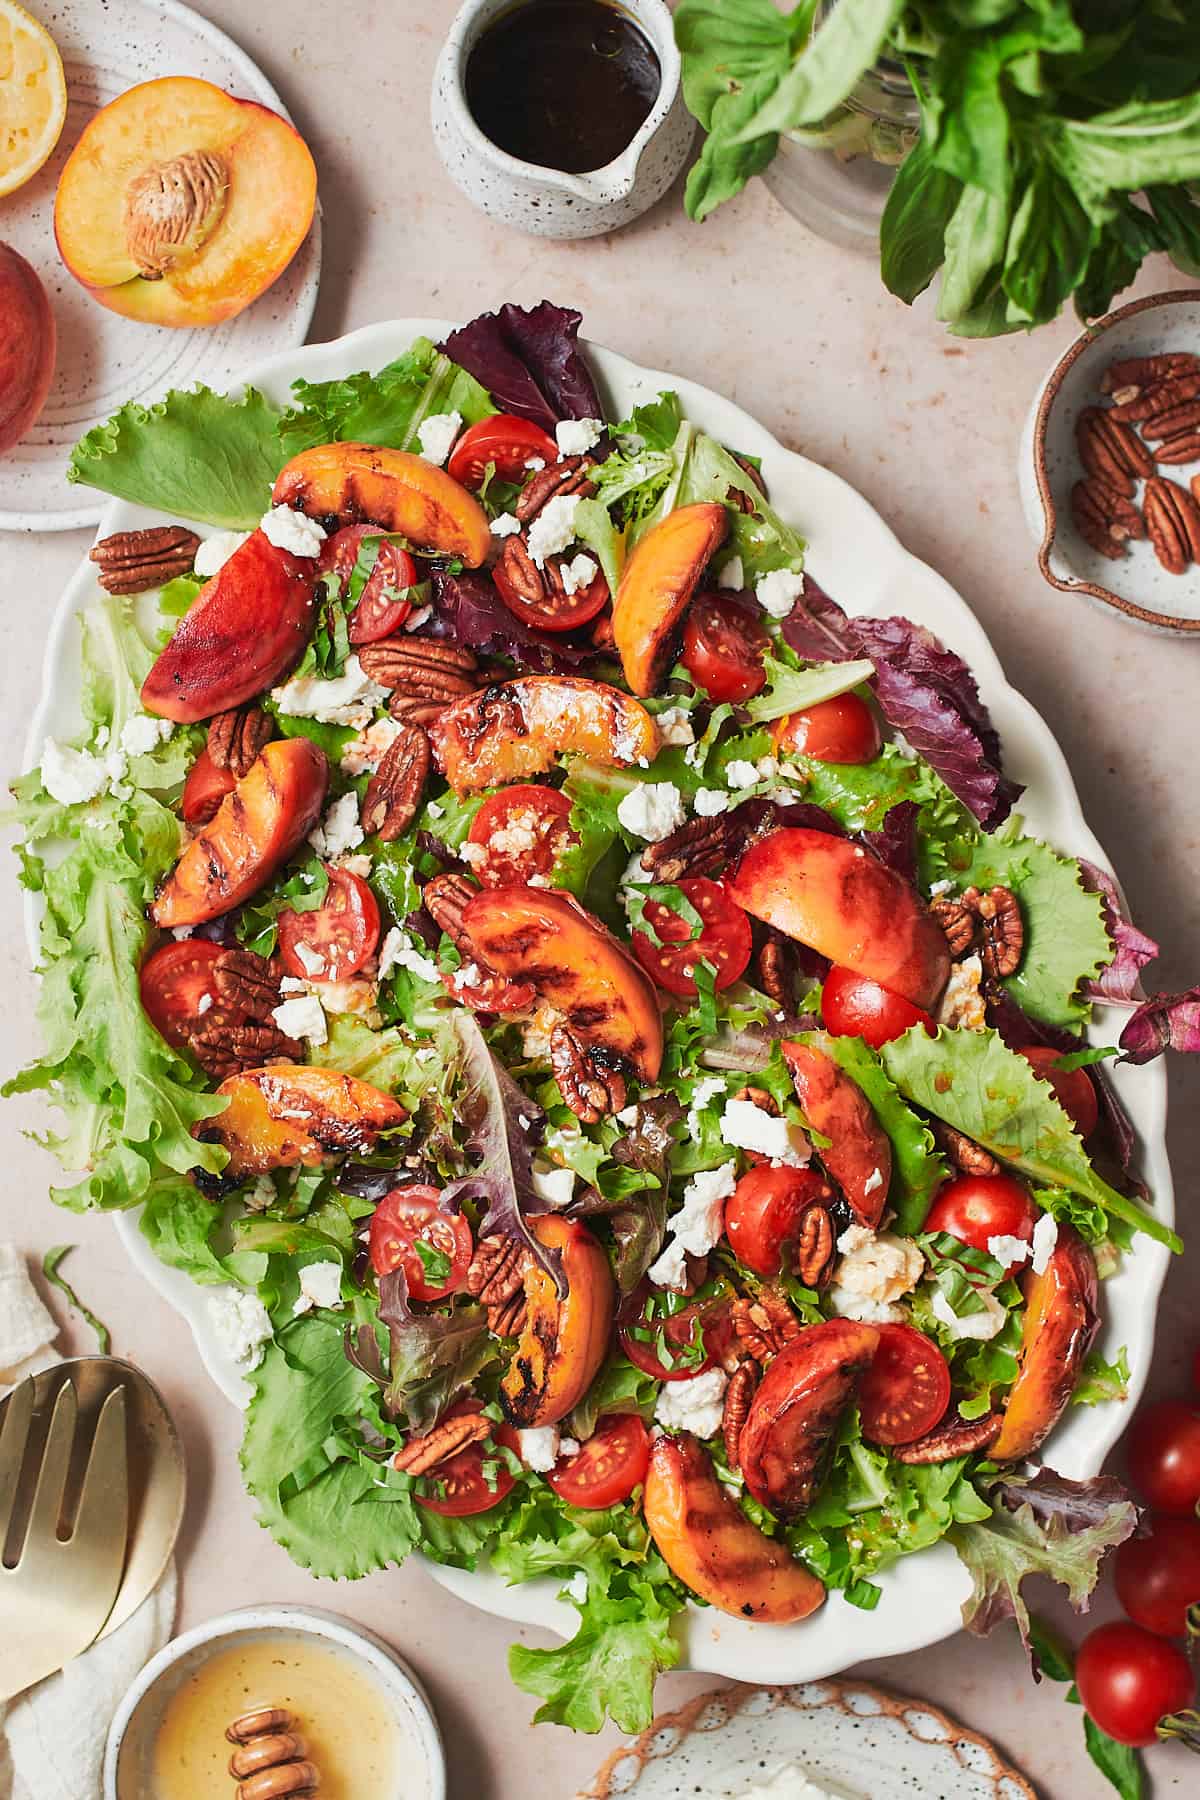 Grilled peach salad beautifully arranged with various ingredients on a serving plate.